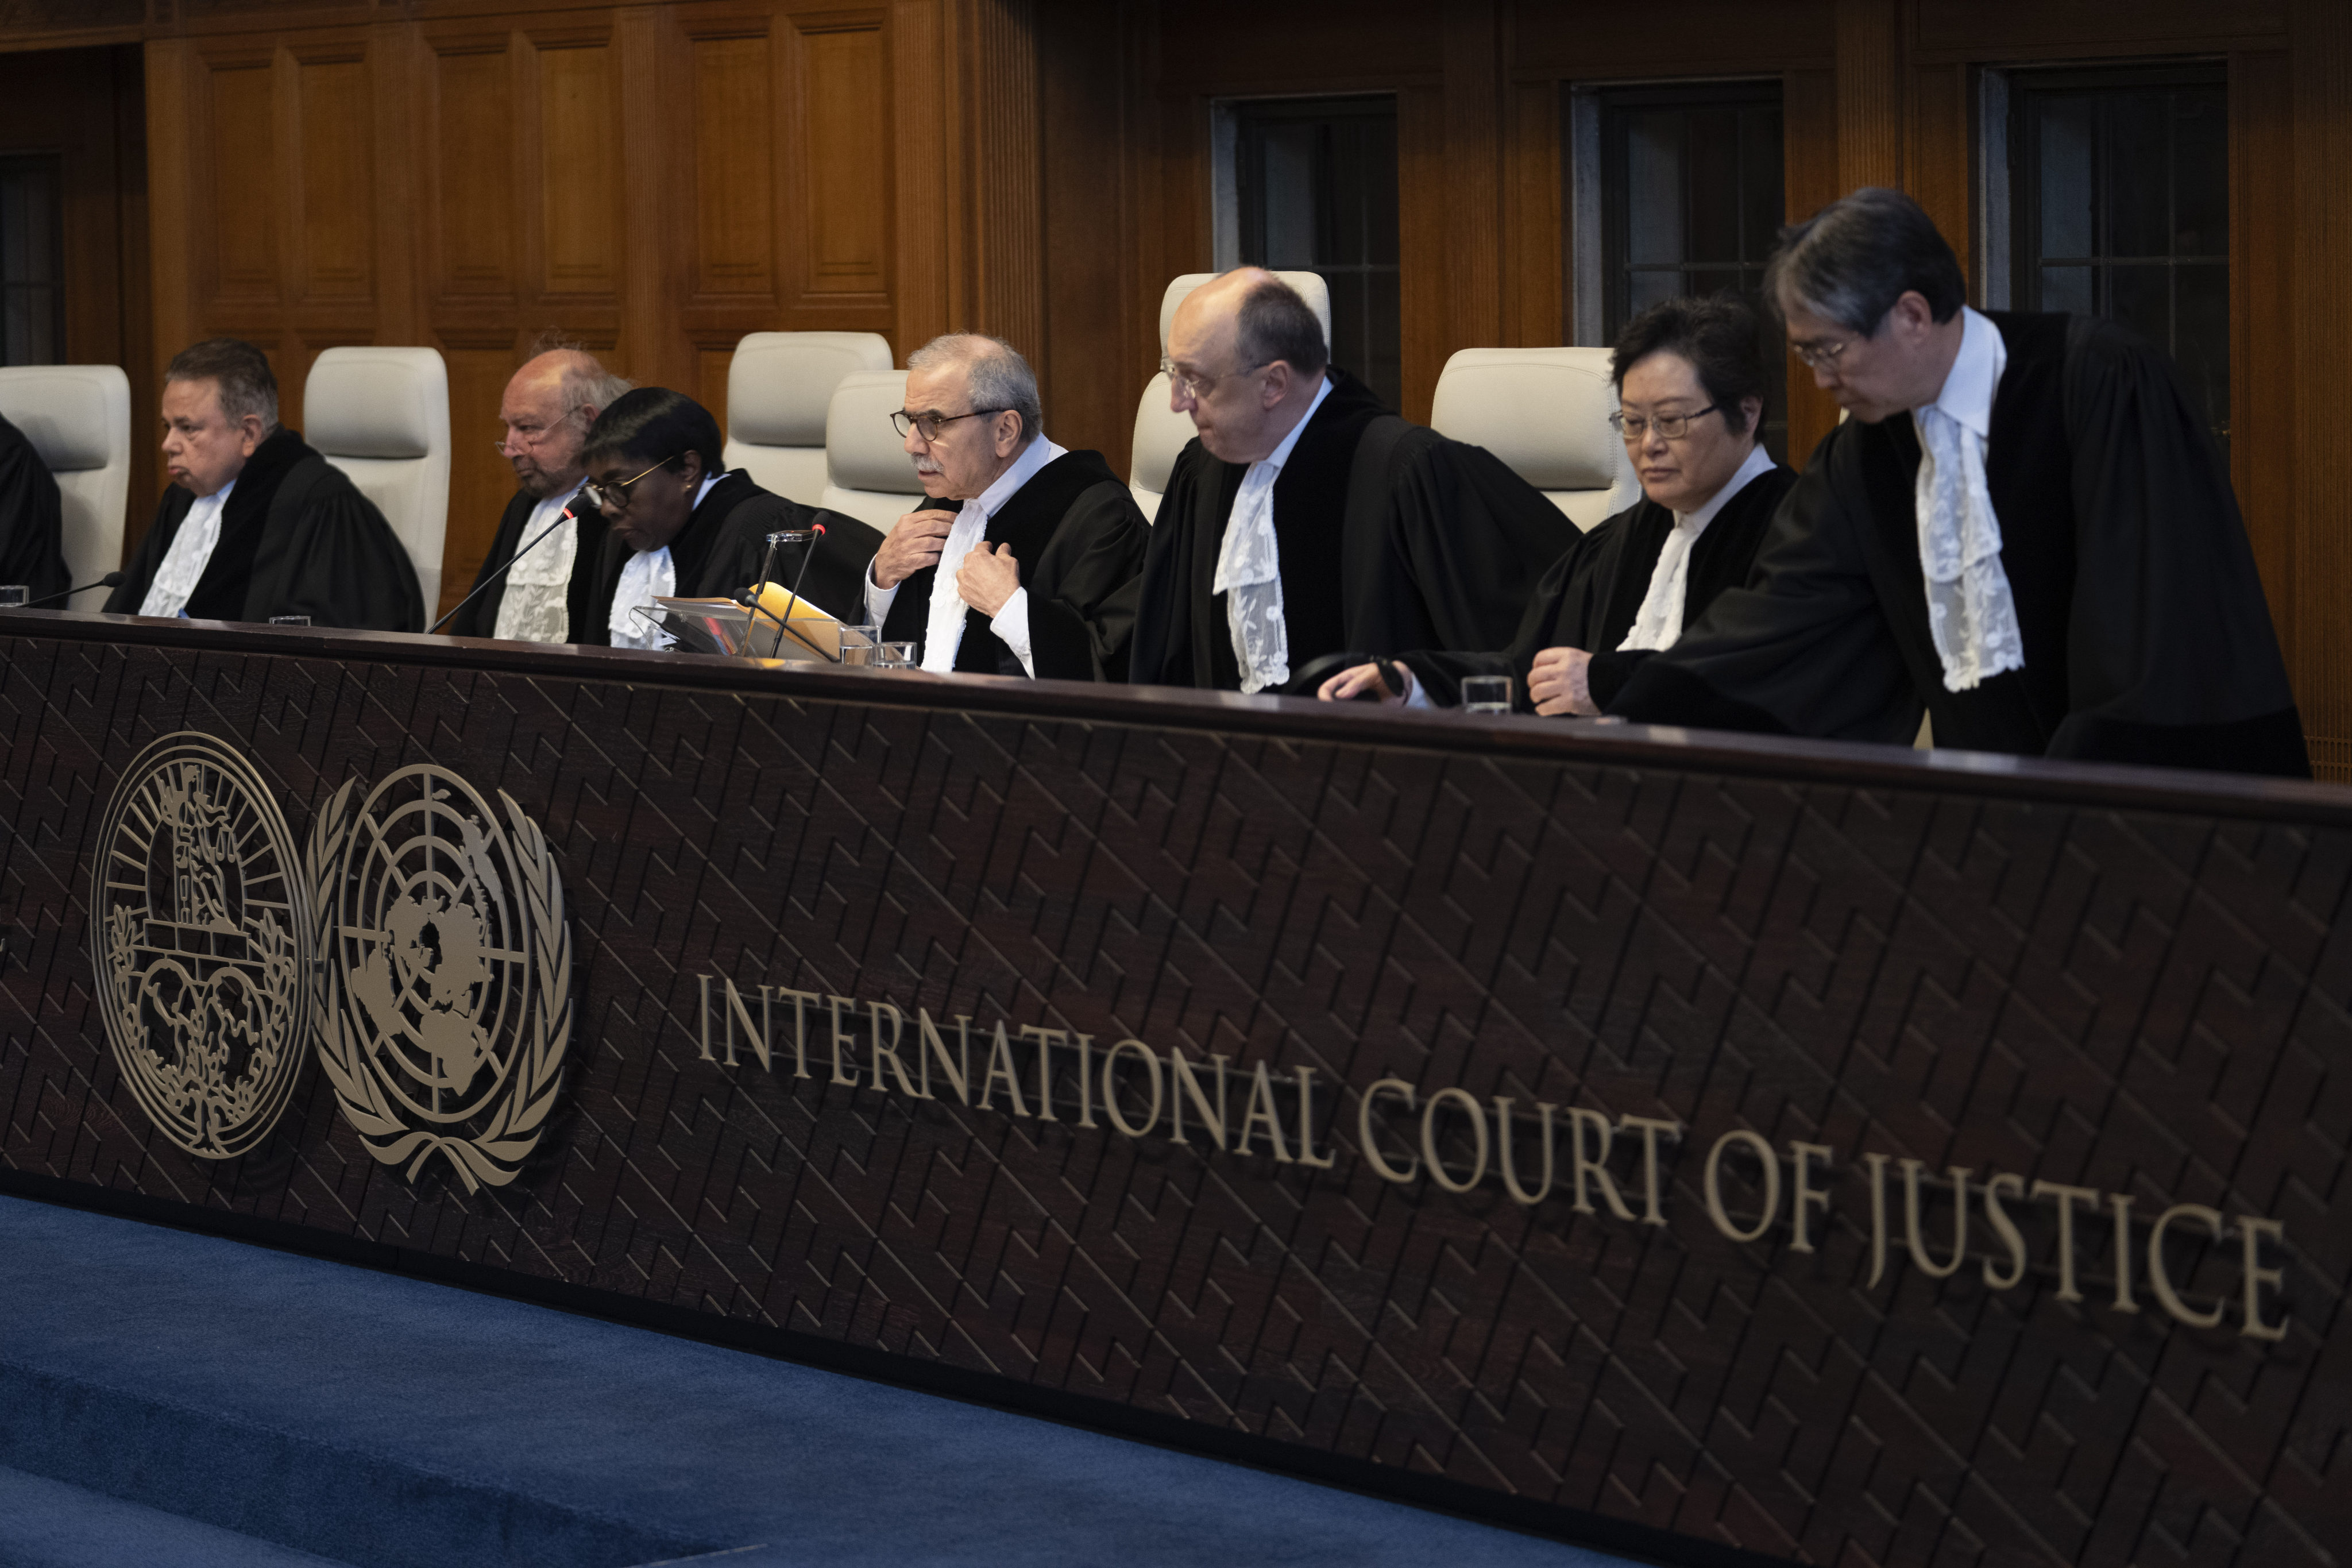 Presiding judge Nawaf Salam, fourth from right, opens the court session of the International Court of Justice in The Hague on a request by Nicaragua for judges to order Germany to halt military aid to Israel. Photo: AP